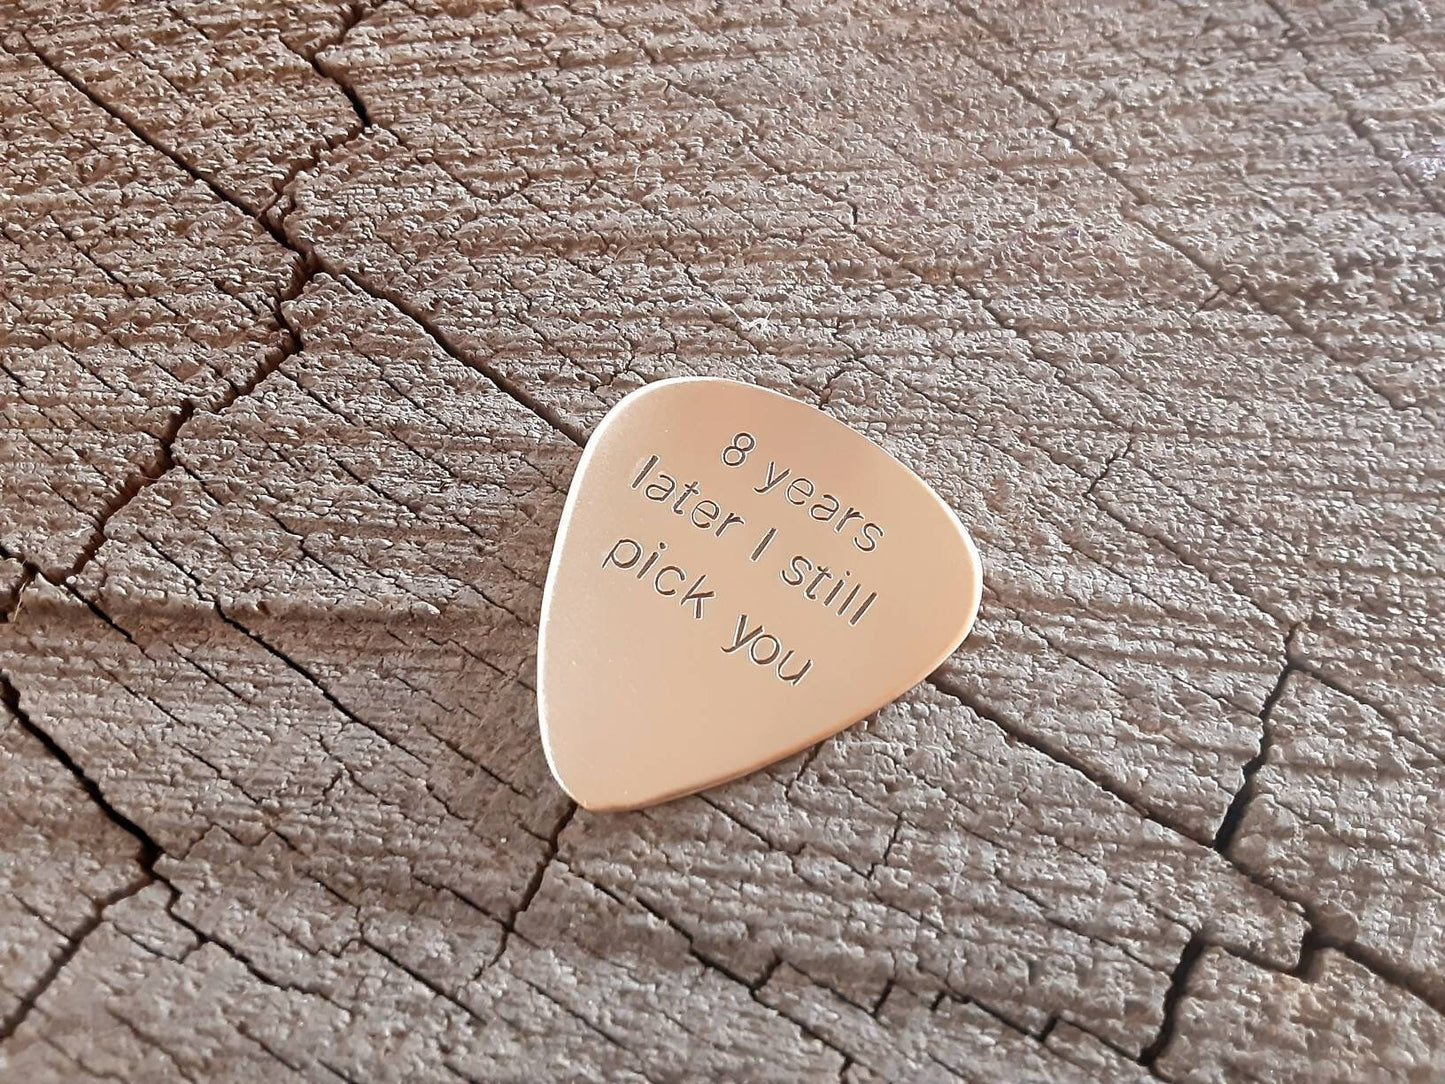 Bronze guitar pick for the 8th anniversary